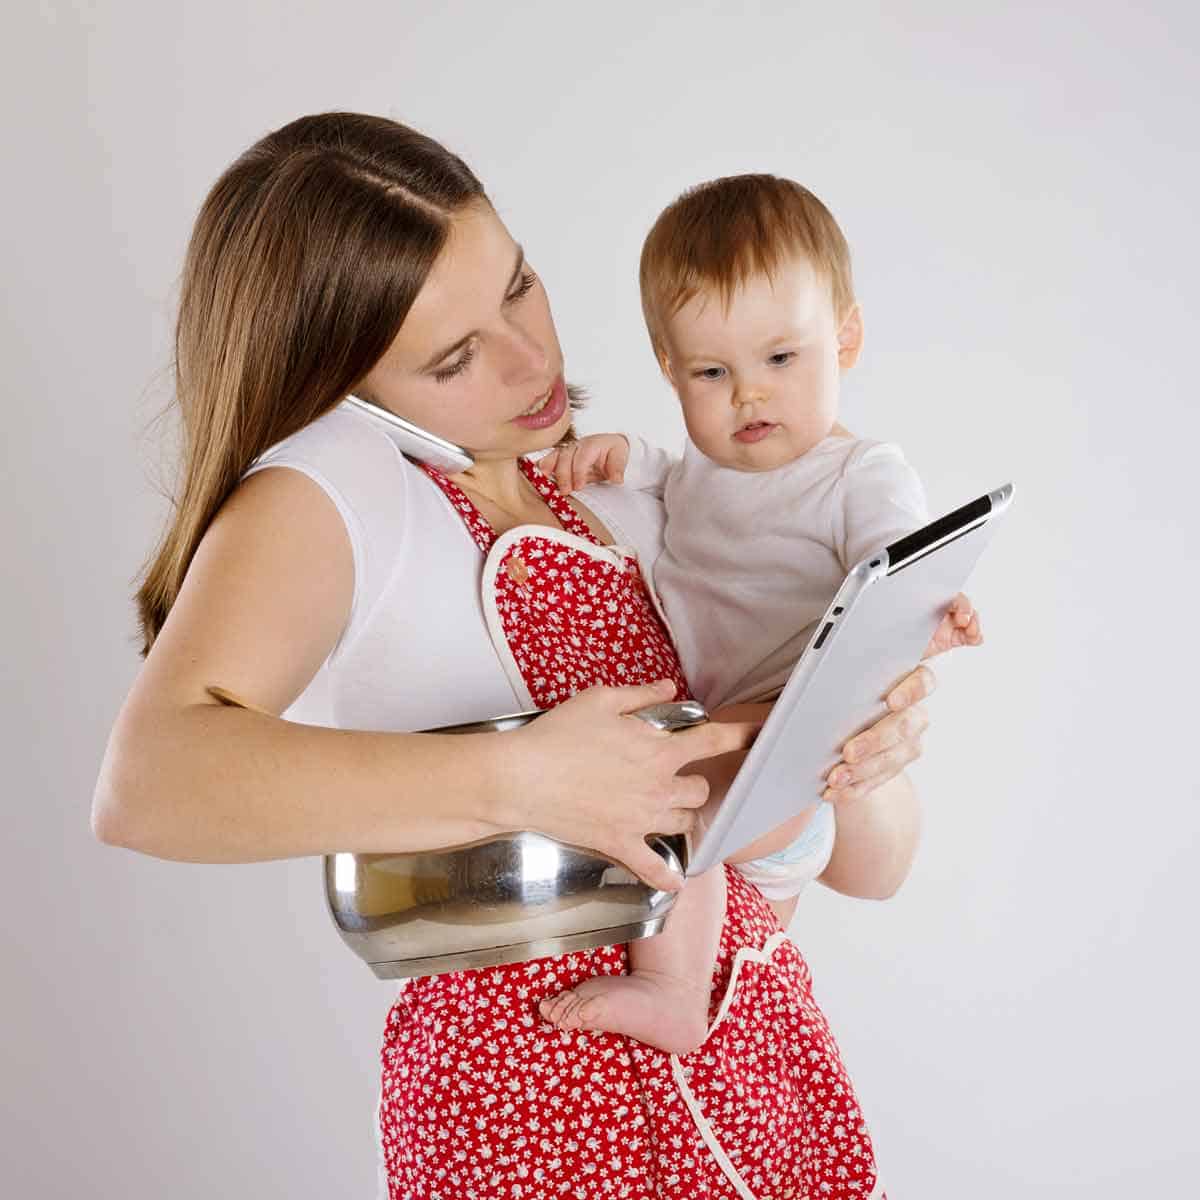 A woman holding a baby, a tablet, and a saucepan, trying to do too much.